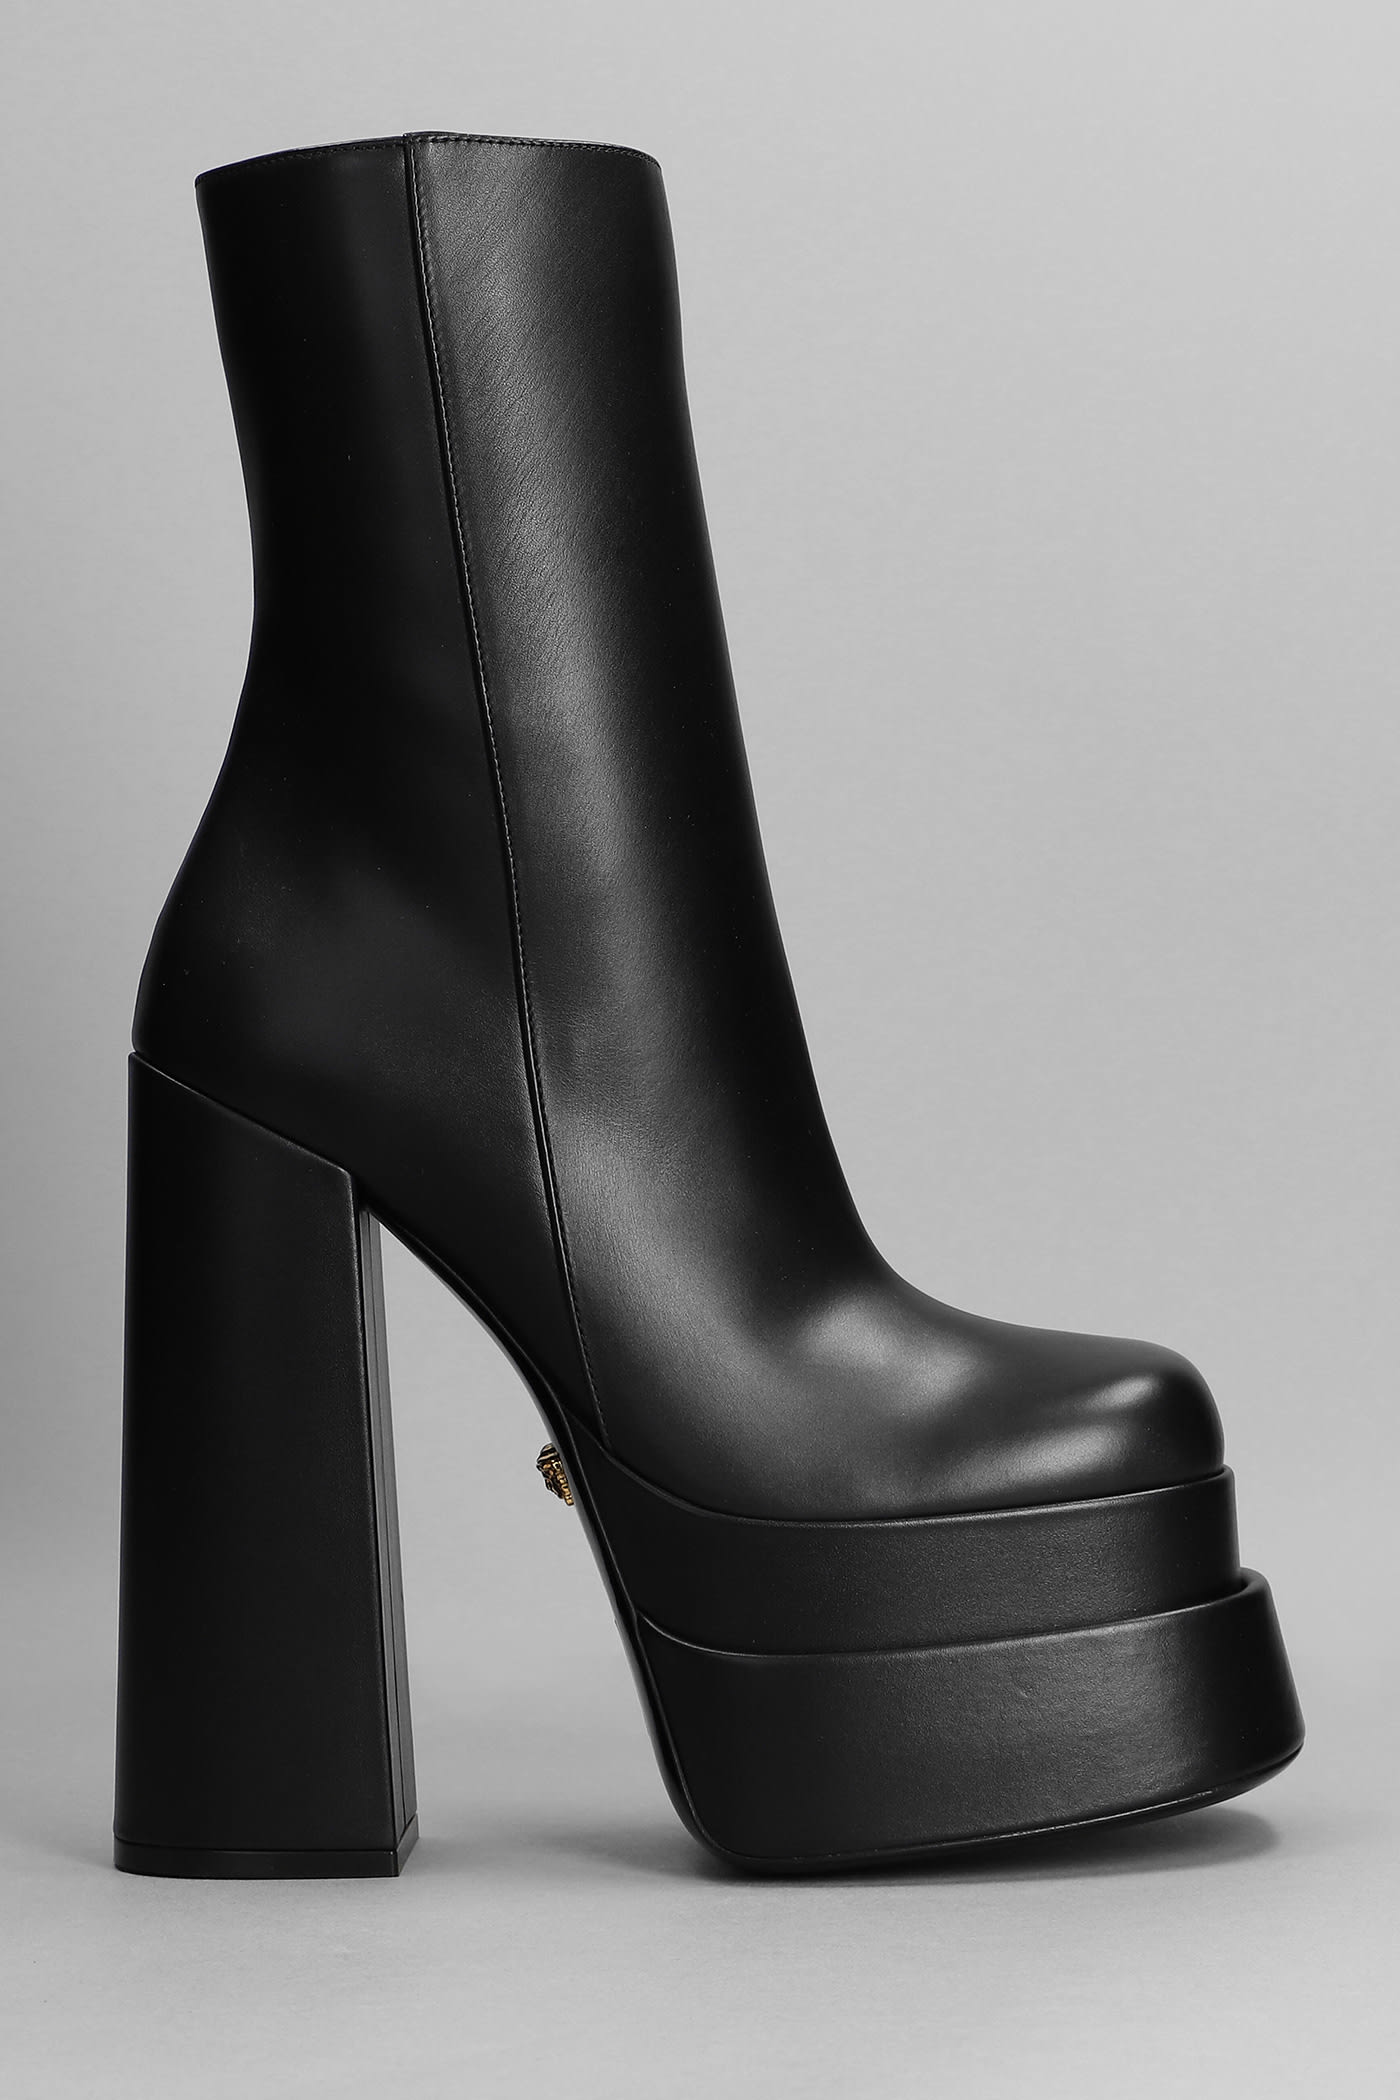 Versace Aevitas High Heels Ankle Boots In Black Leather